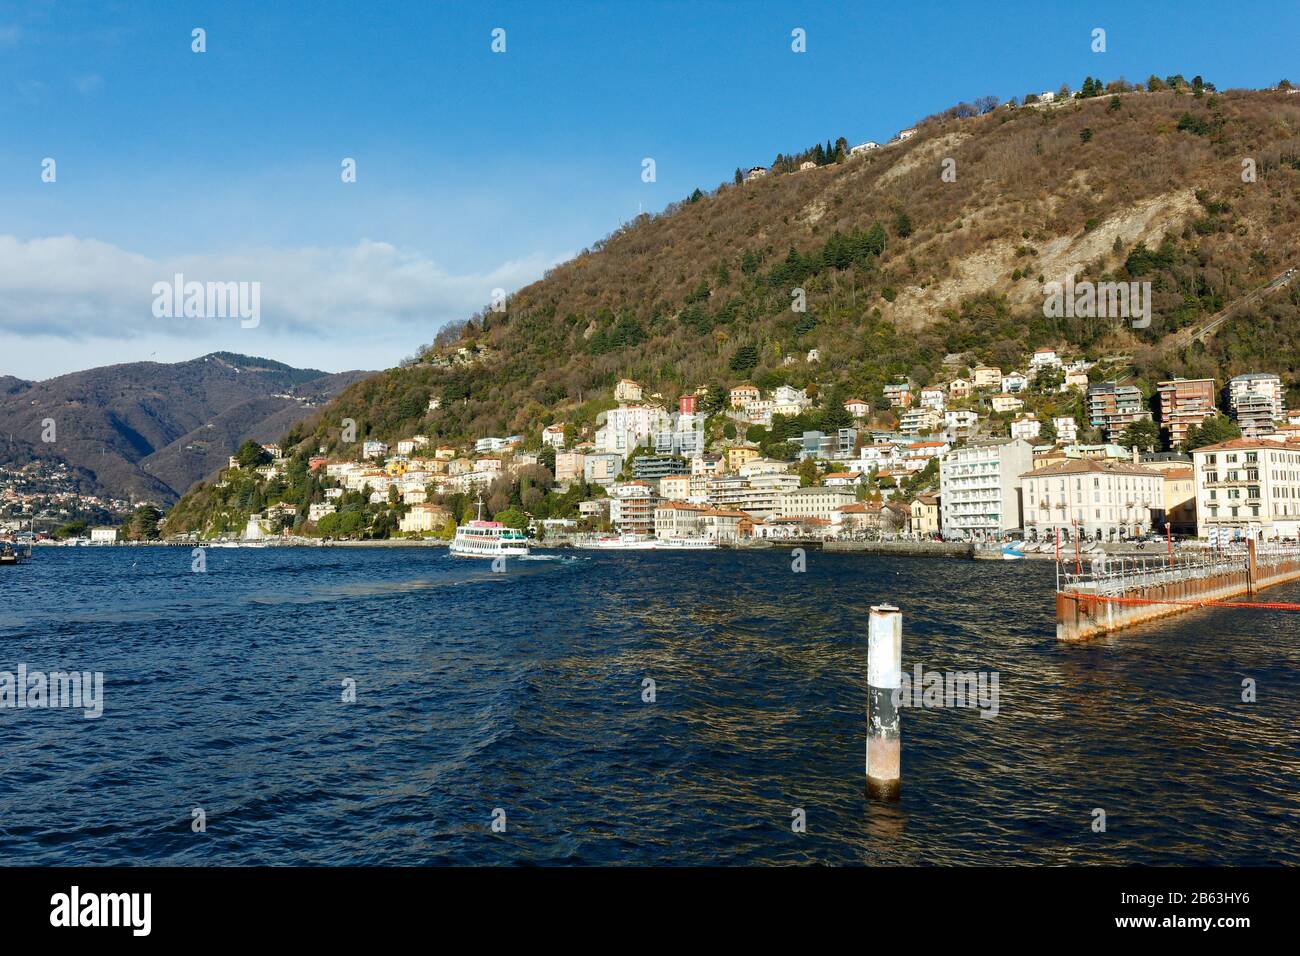 Lake como lago di como in italy italia with mountains and buildings on a hill Stock Photo